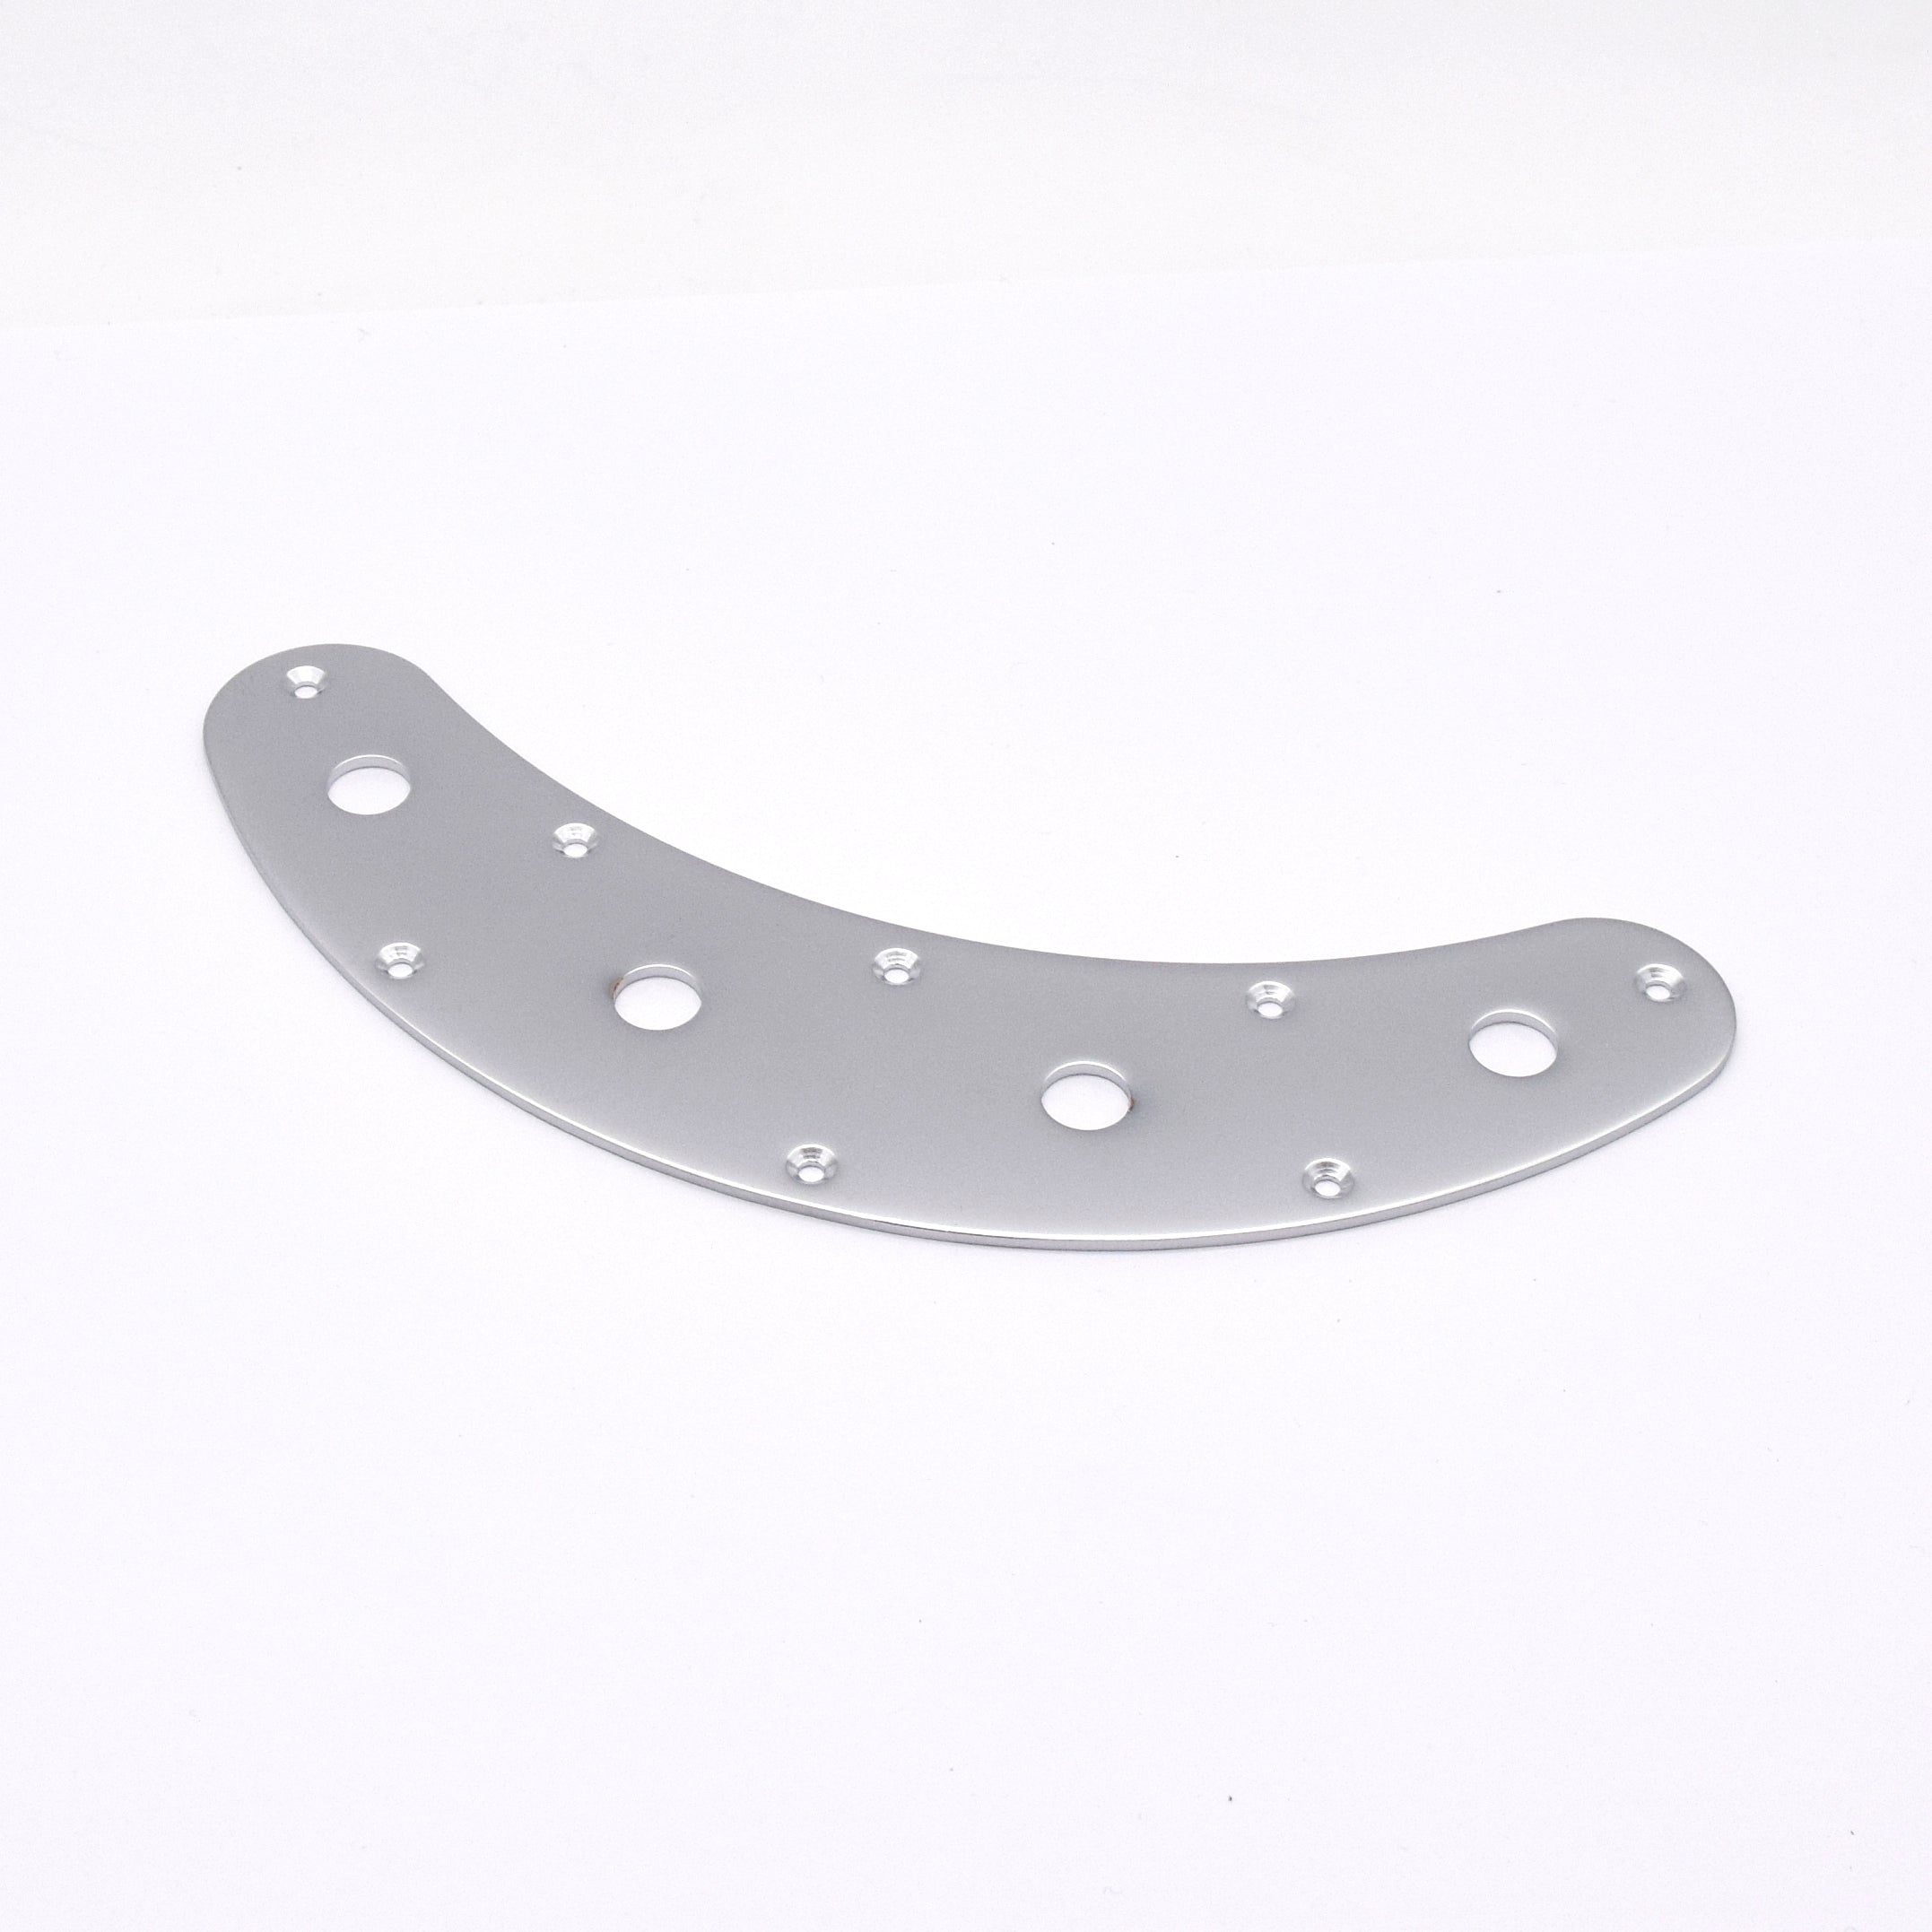 KD By AxLabs Steel "Boomerang" Control Plate, StingRay Style 4-Hole Mount - AxLabs